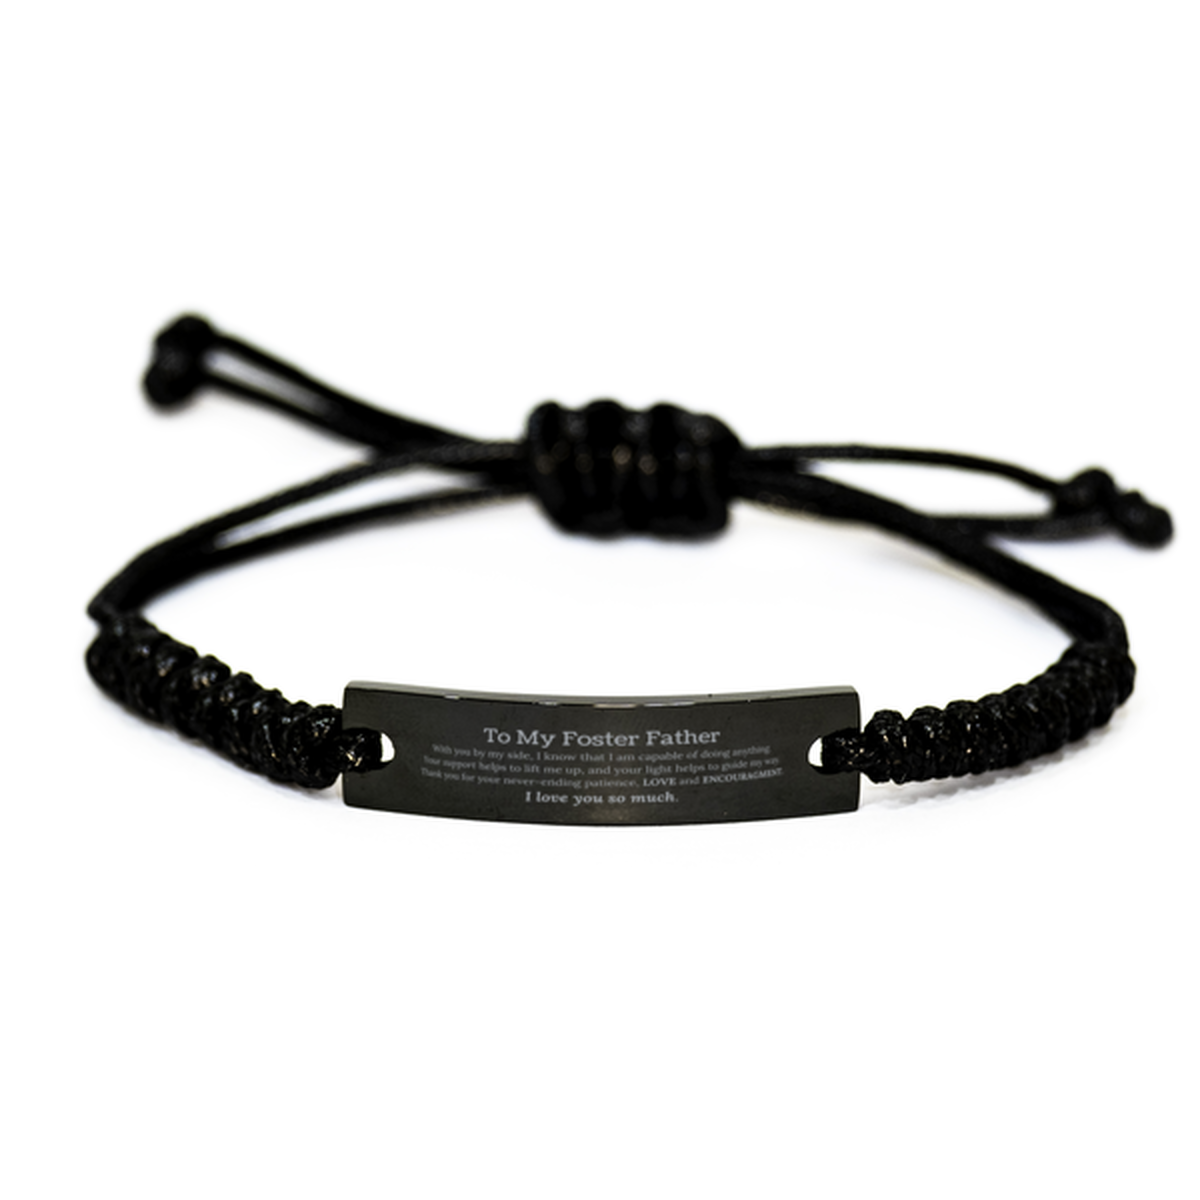 Appreciation Foster Father Black Rope Bracelet Gifts, To My Foster Father Birthday Christmas Wedding Keepsake Gifts for Foster Father With you by my side, I know that I am capable of doing anything. I love you so much